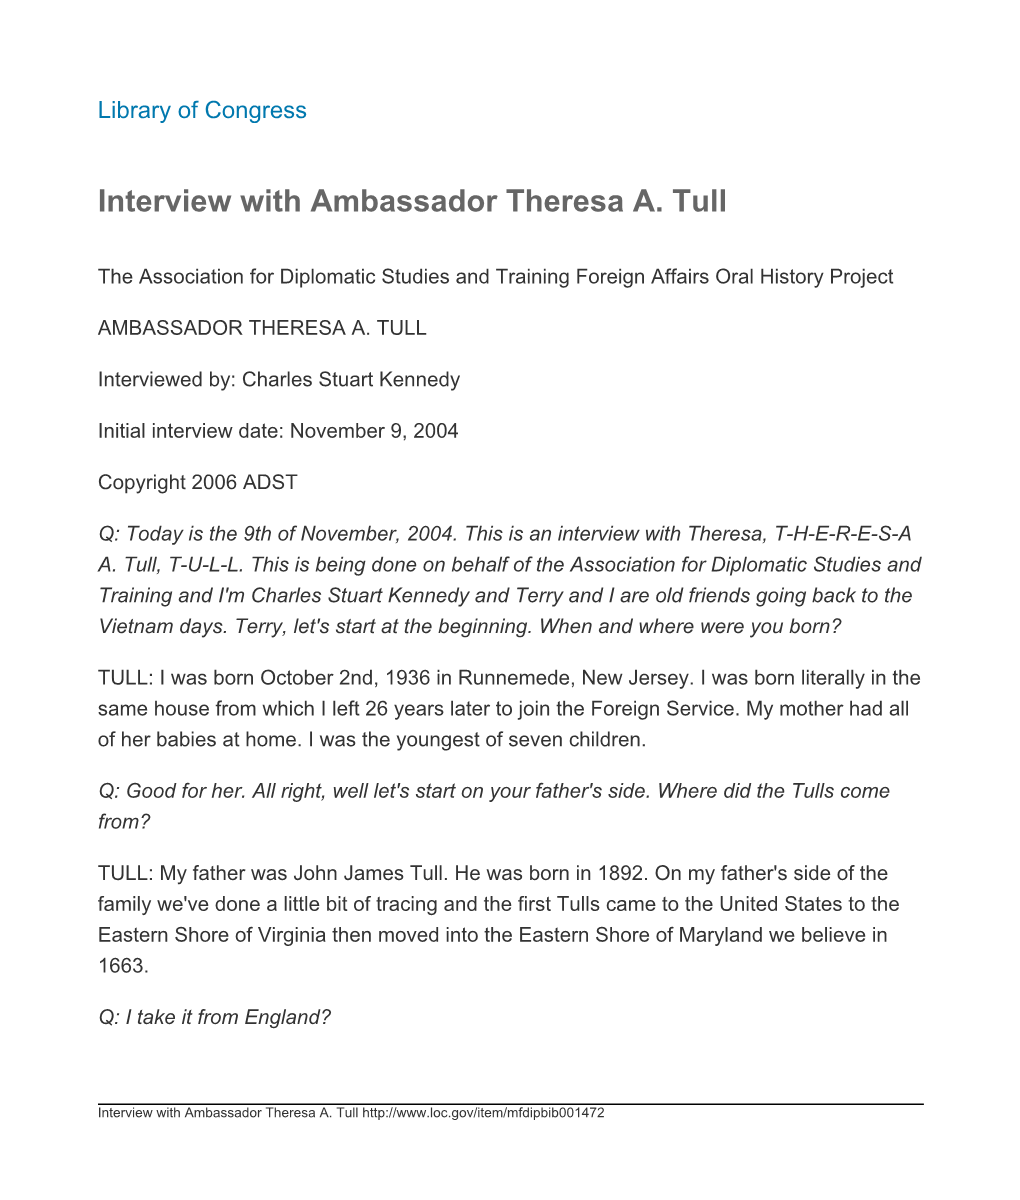 Interview with Ambassador Theresa A. Tull